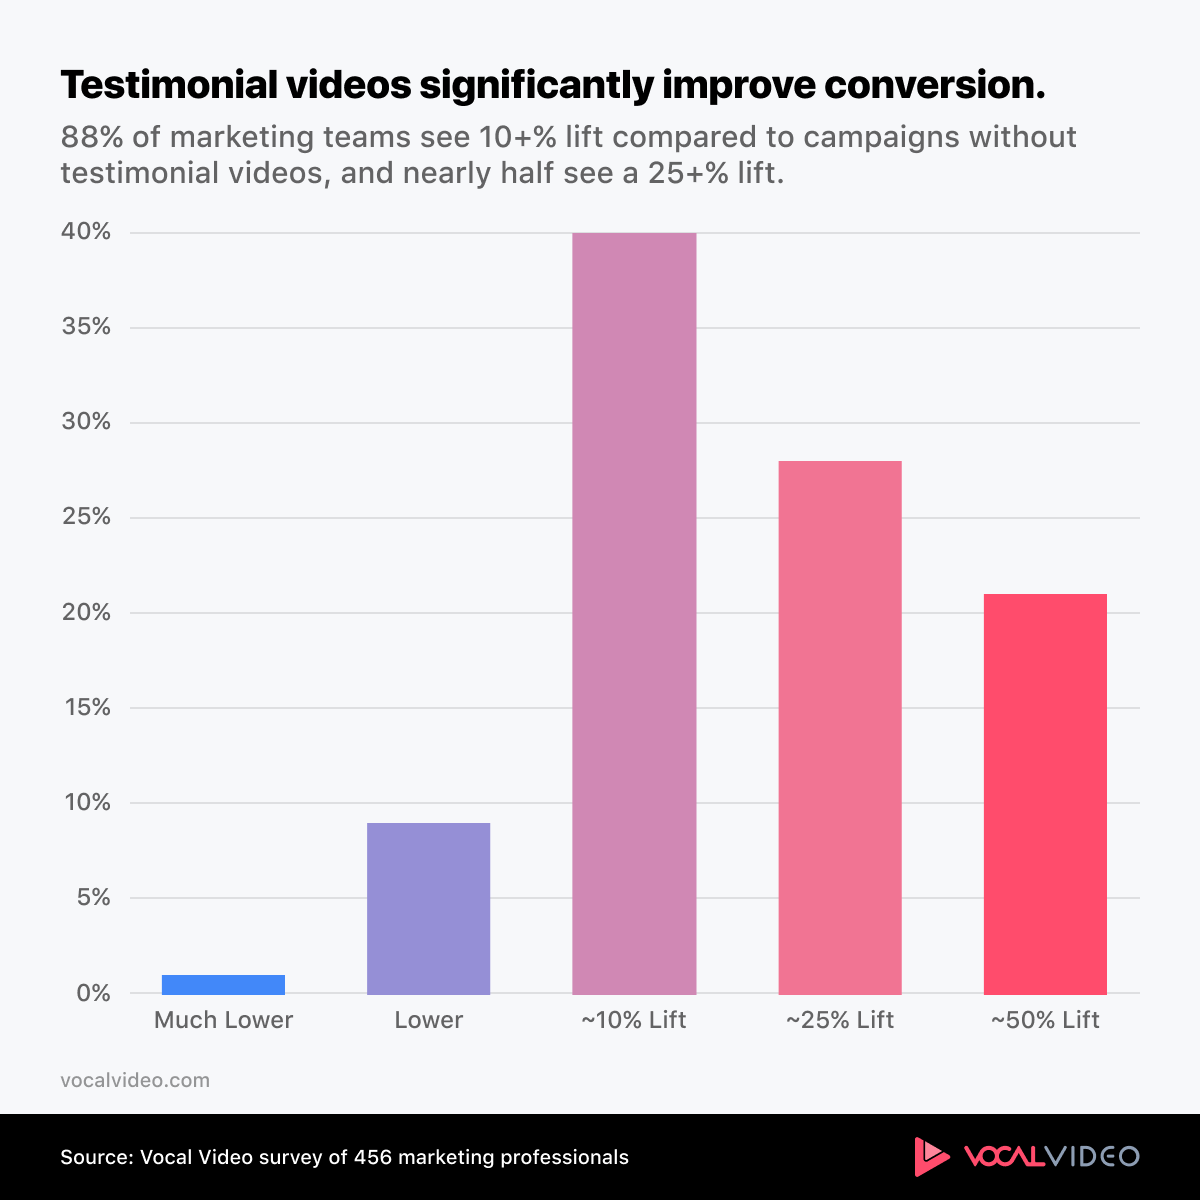 Testimonial videos significantly increase conversions: 88% of marketing teams see a 10+% lift compared to campaigns without testimonial videos.